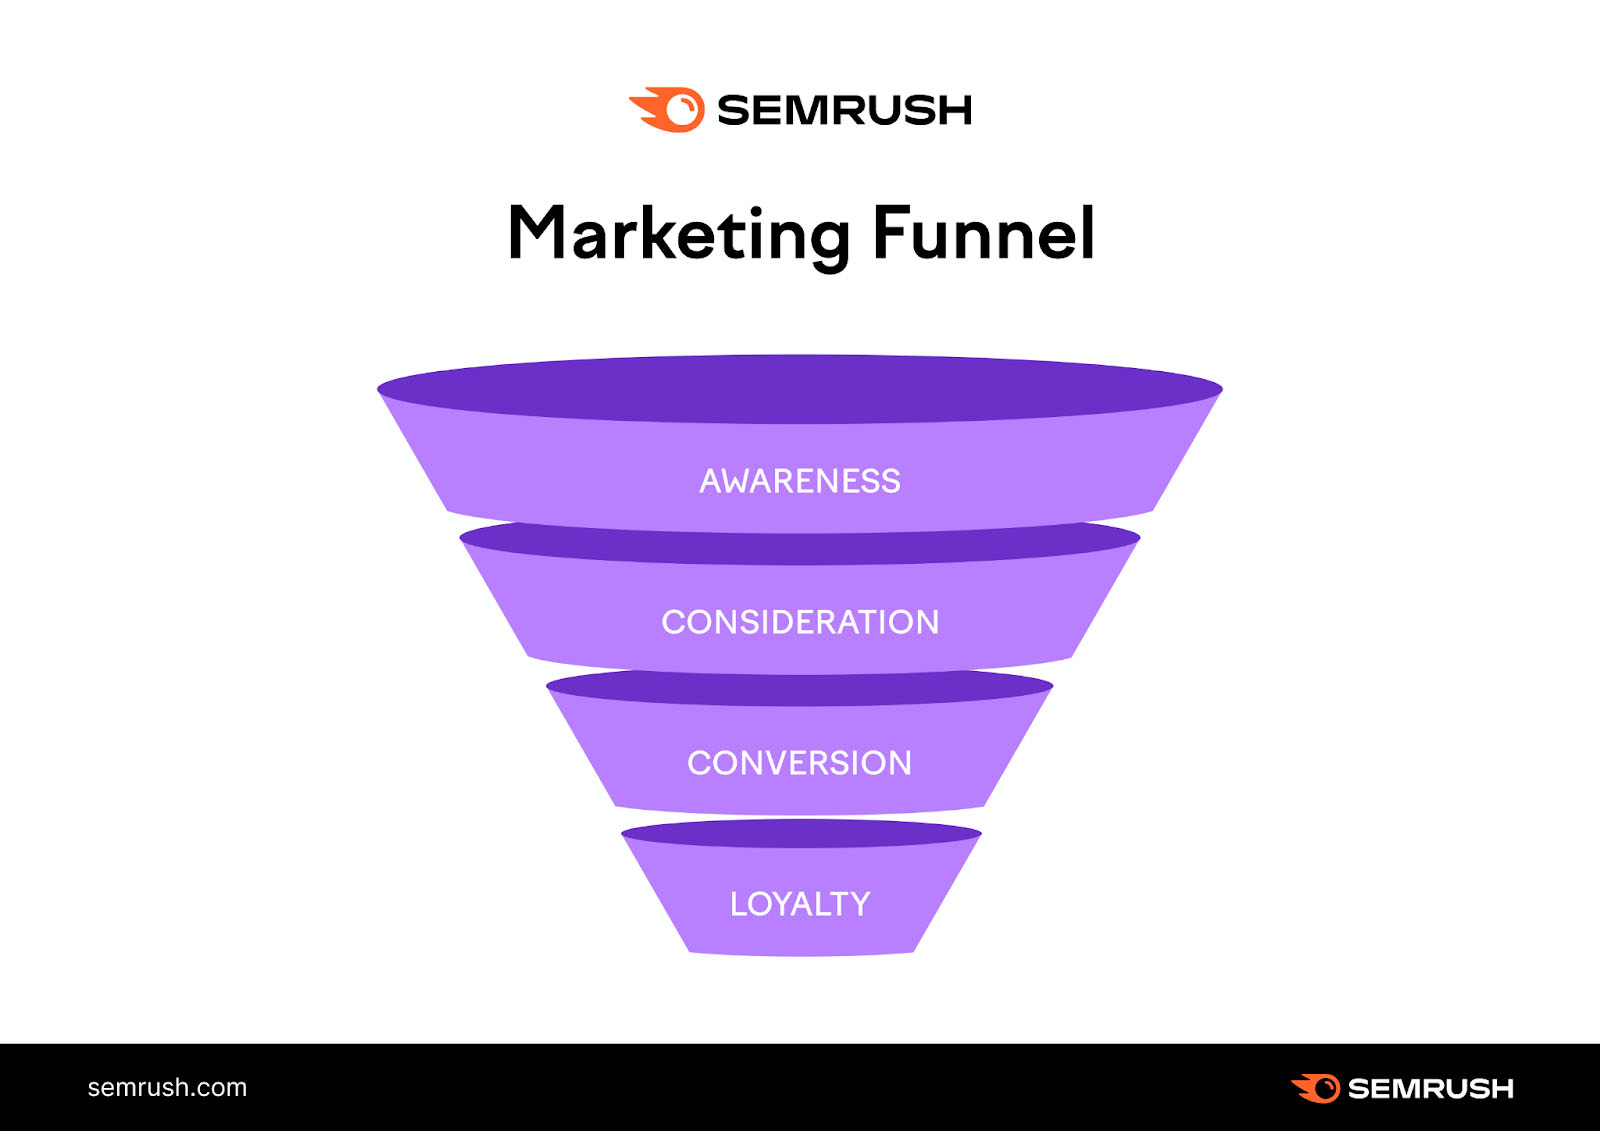 marketing funnel is awareness, consideration, conversion, then loyalty